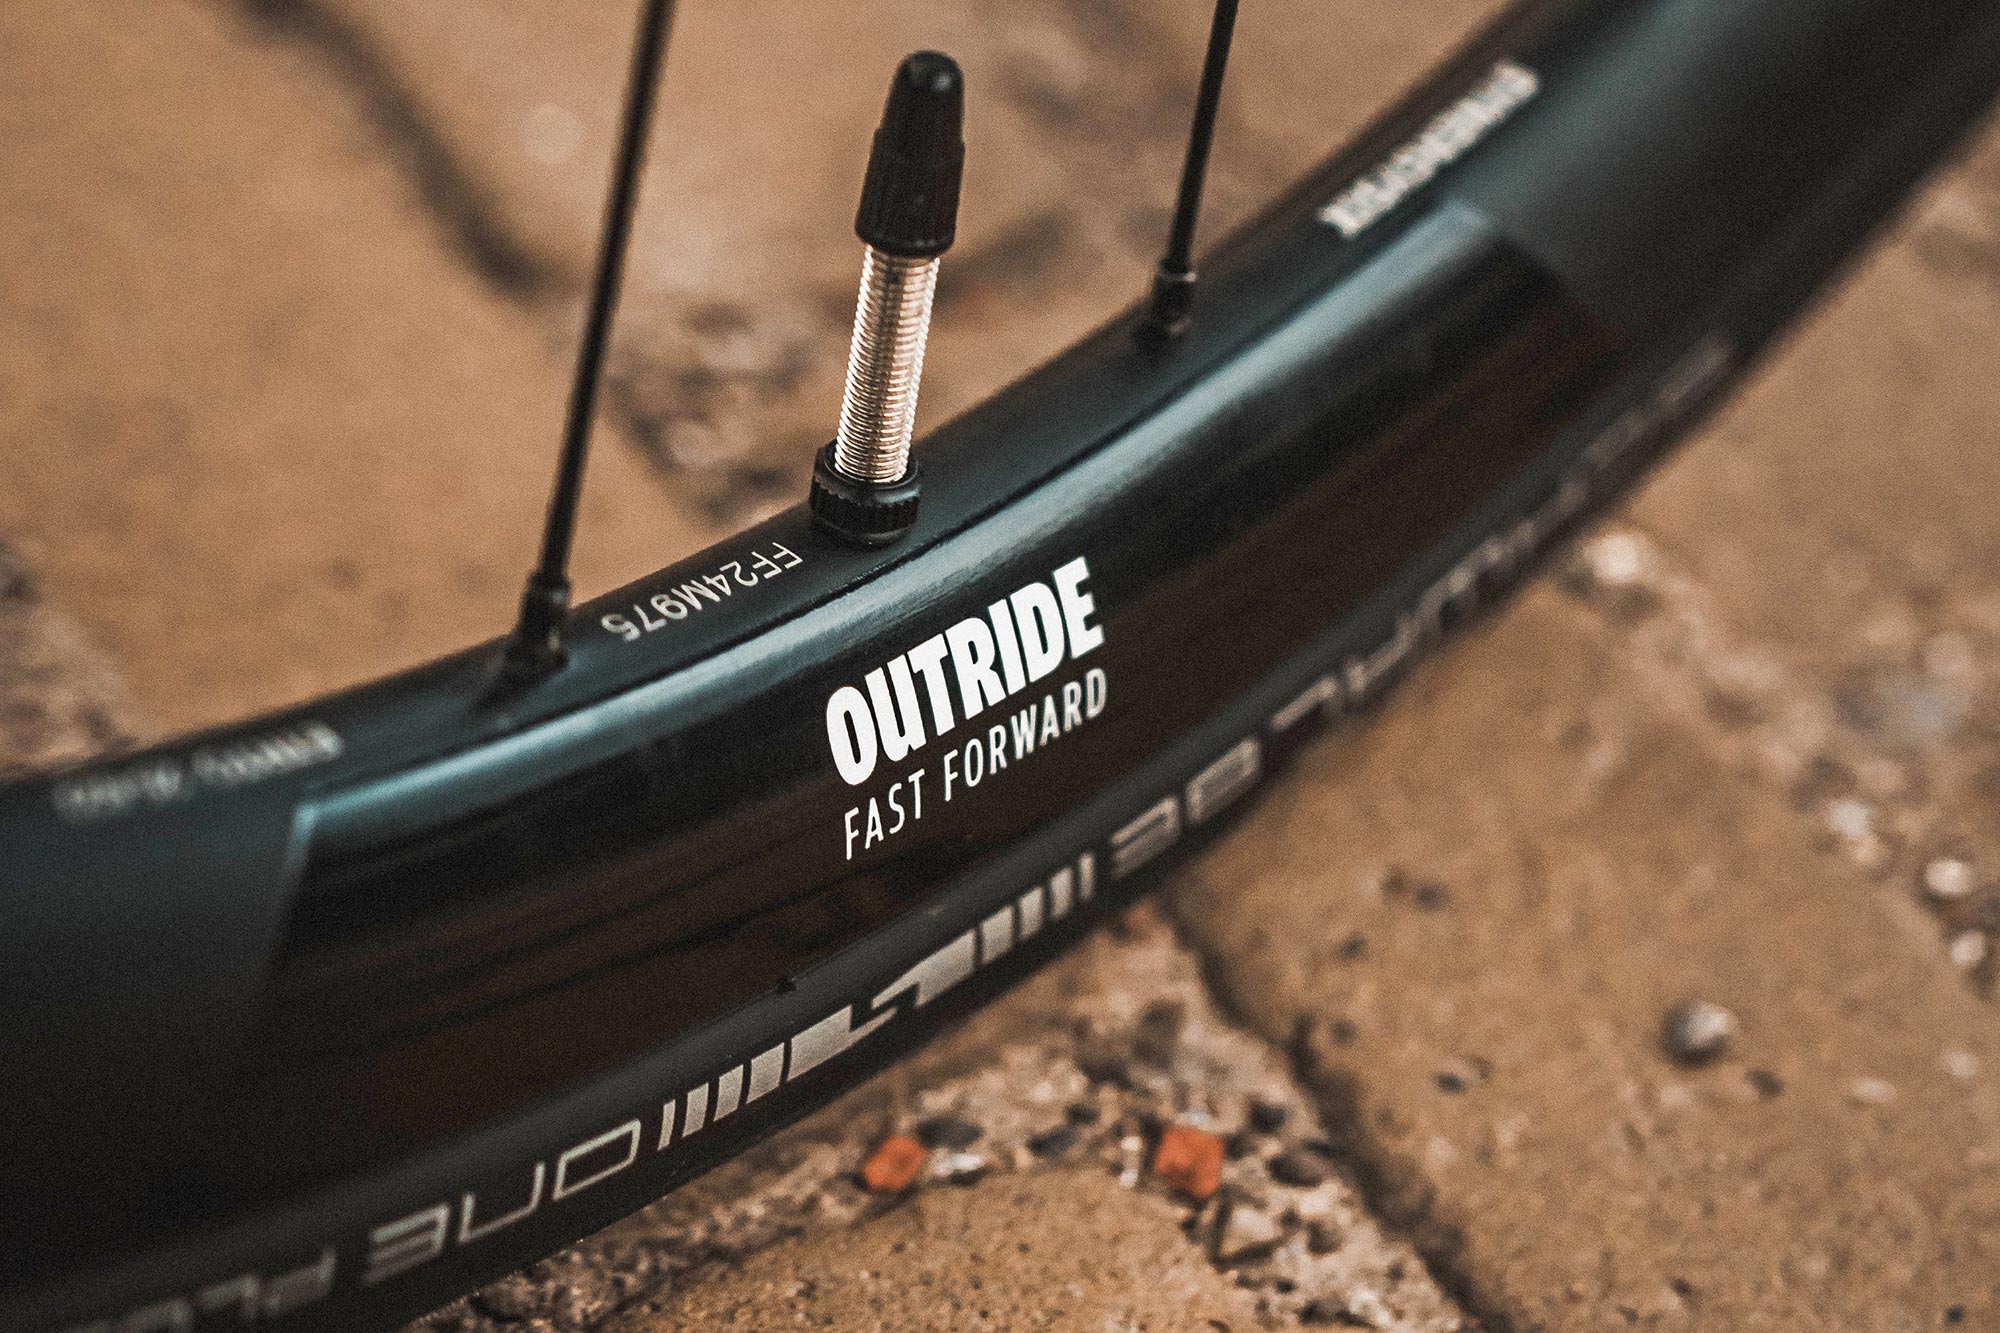 FFWD Outride affordable aluminum alloy all-road allrounder gravel bike wheels, up close